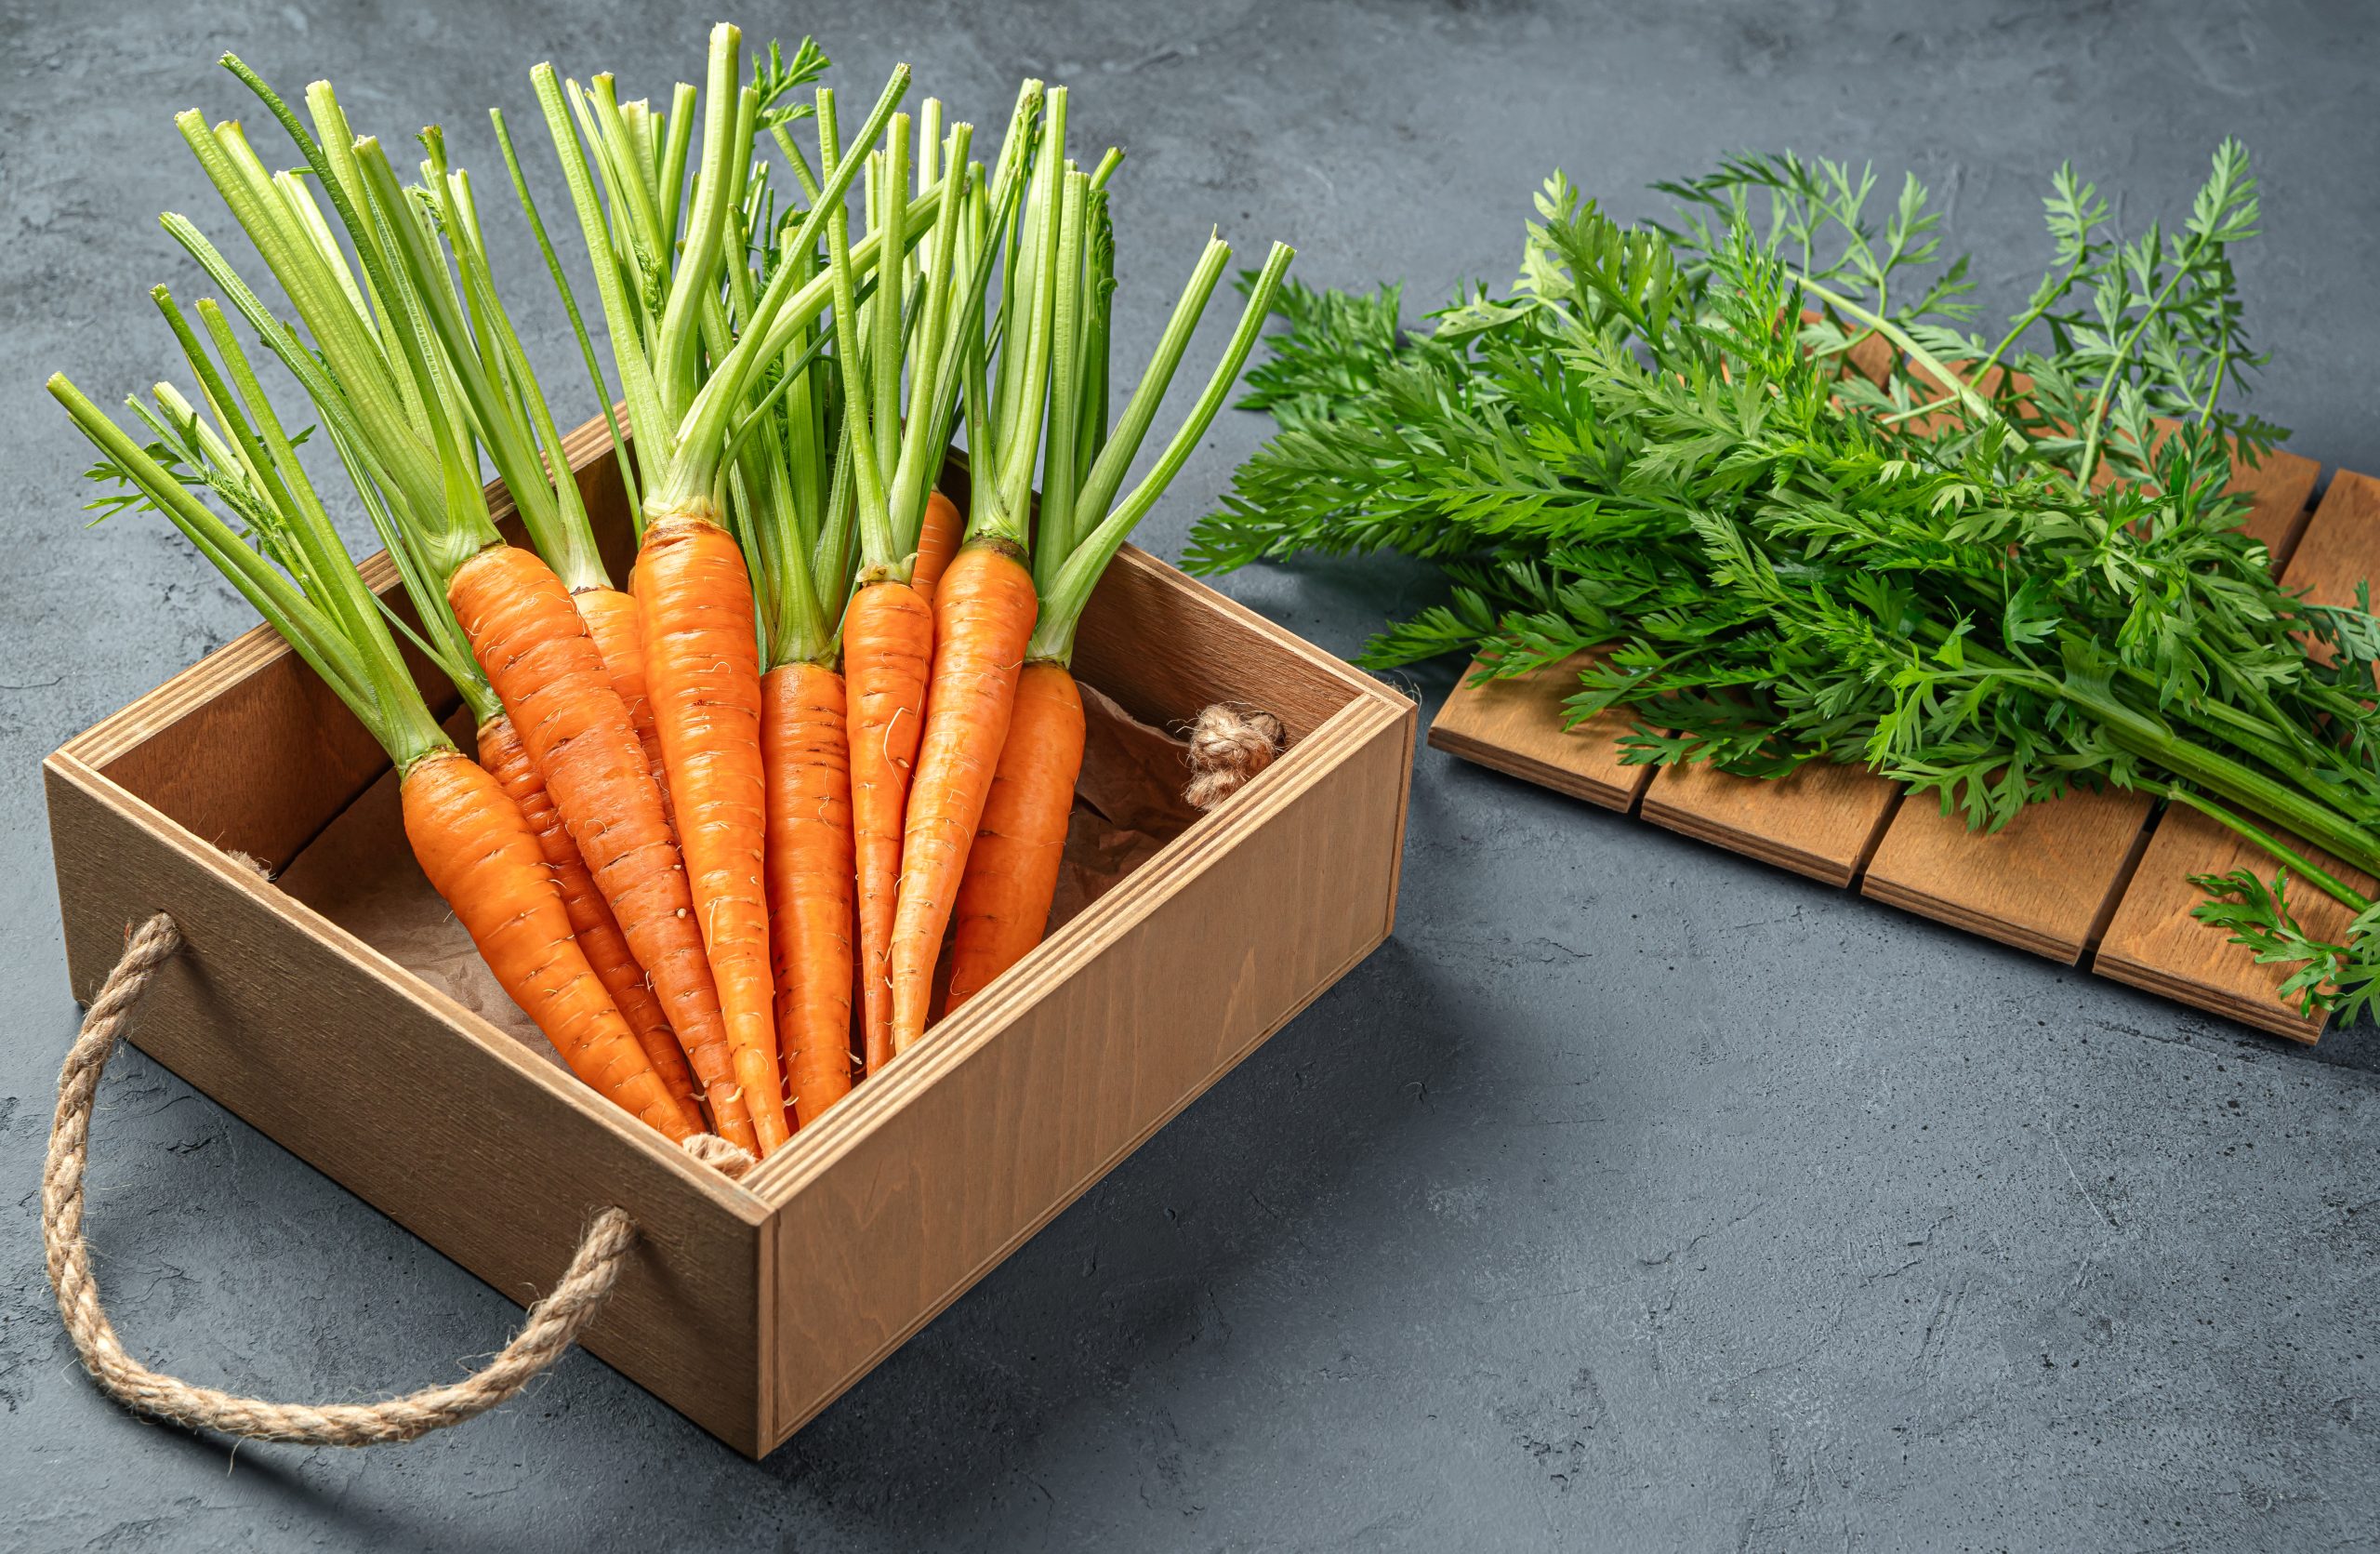 10 Benefits of Carrots That Will Blow Your Mind